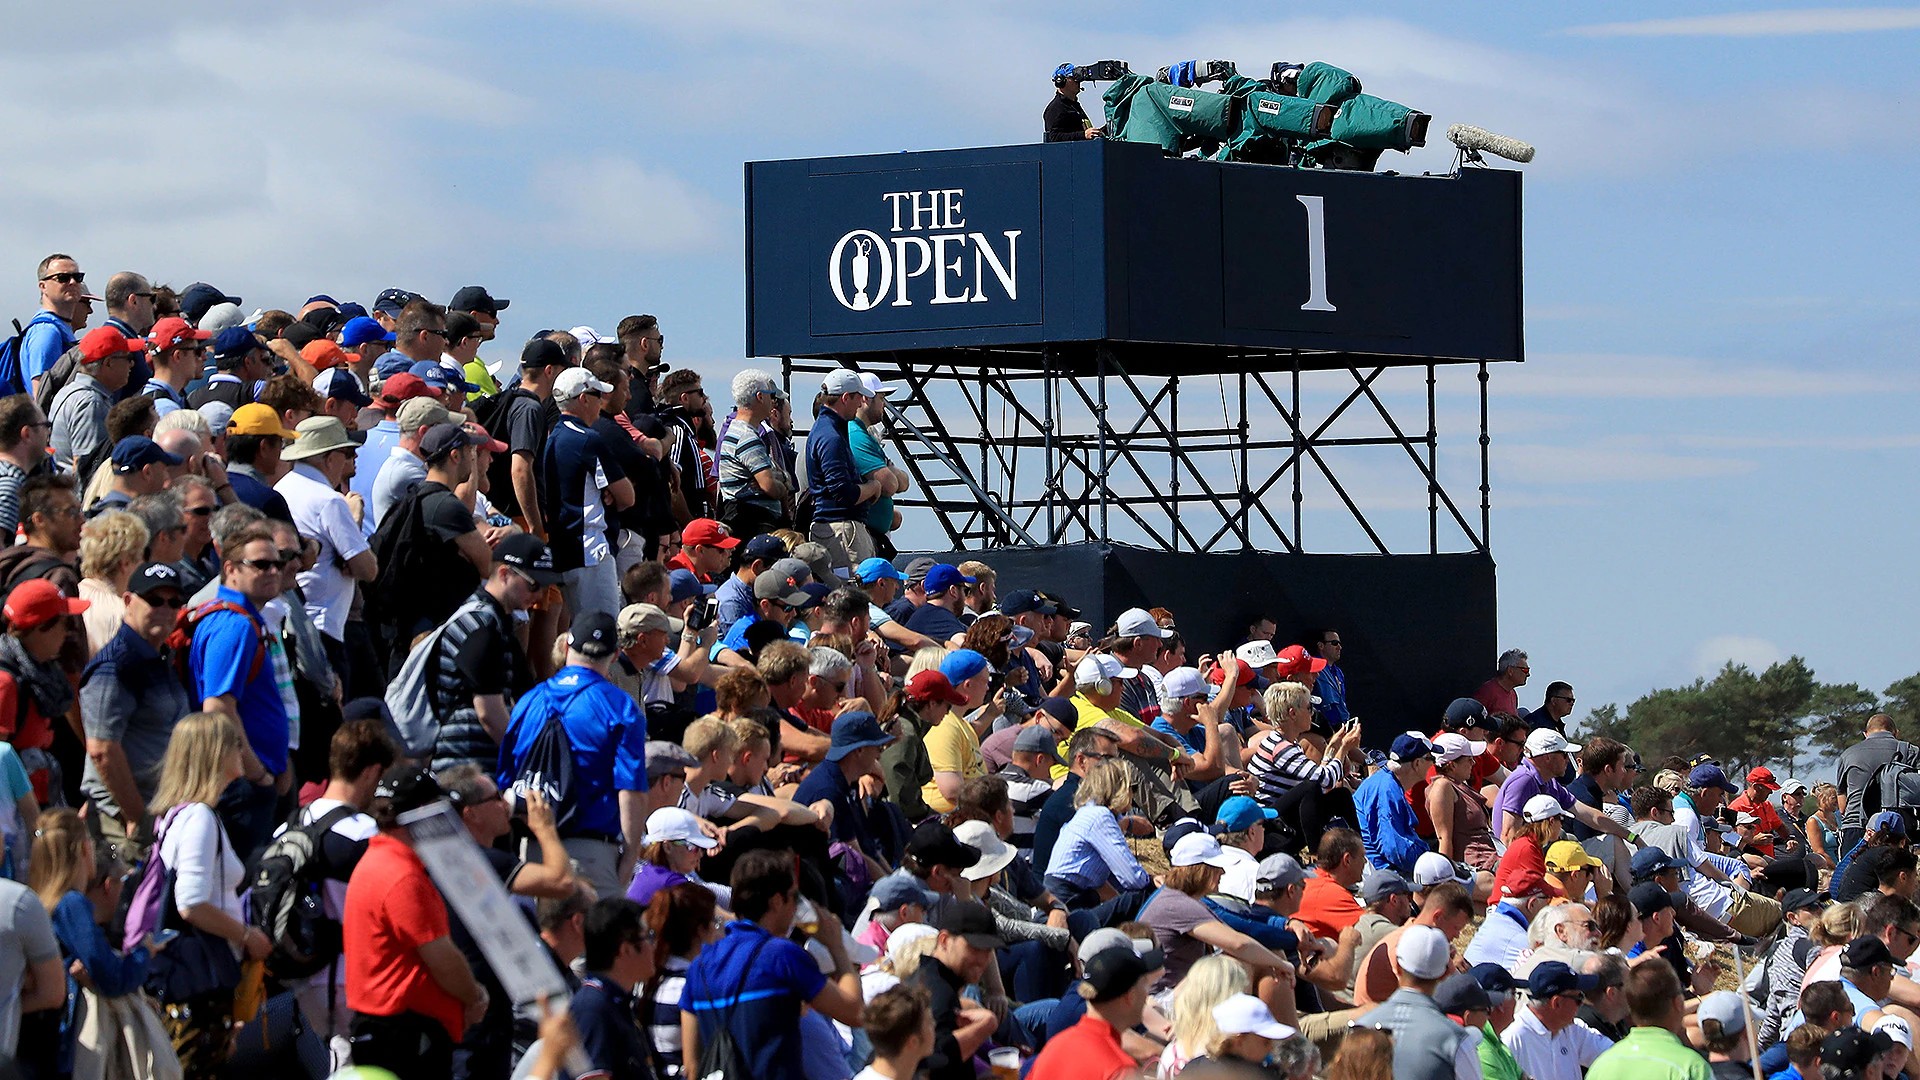 How to watch The Open Championship on NBC, USA and Peacock